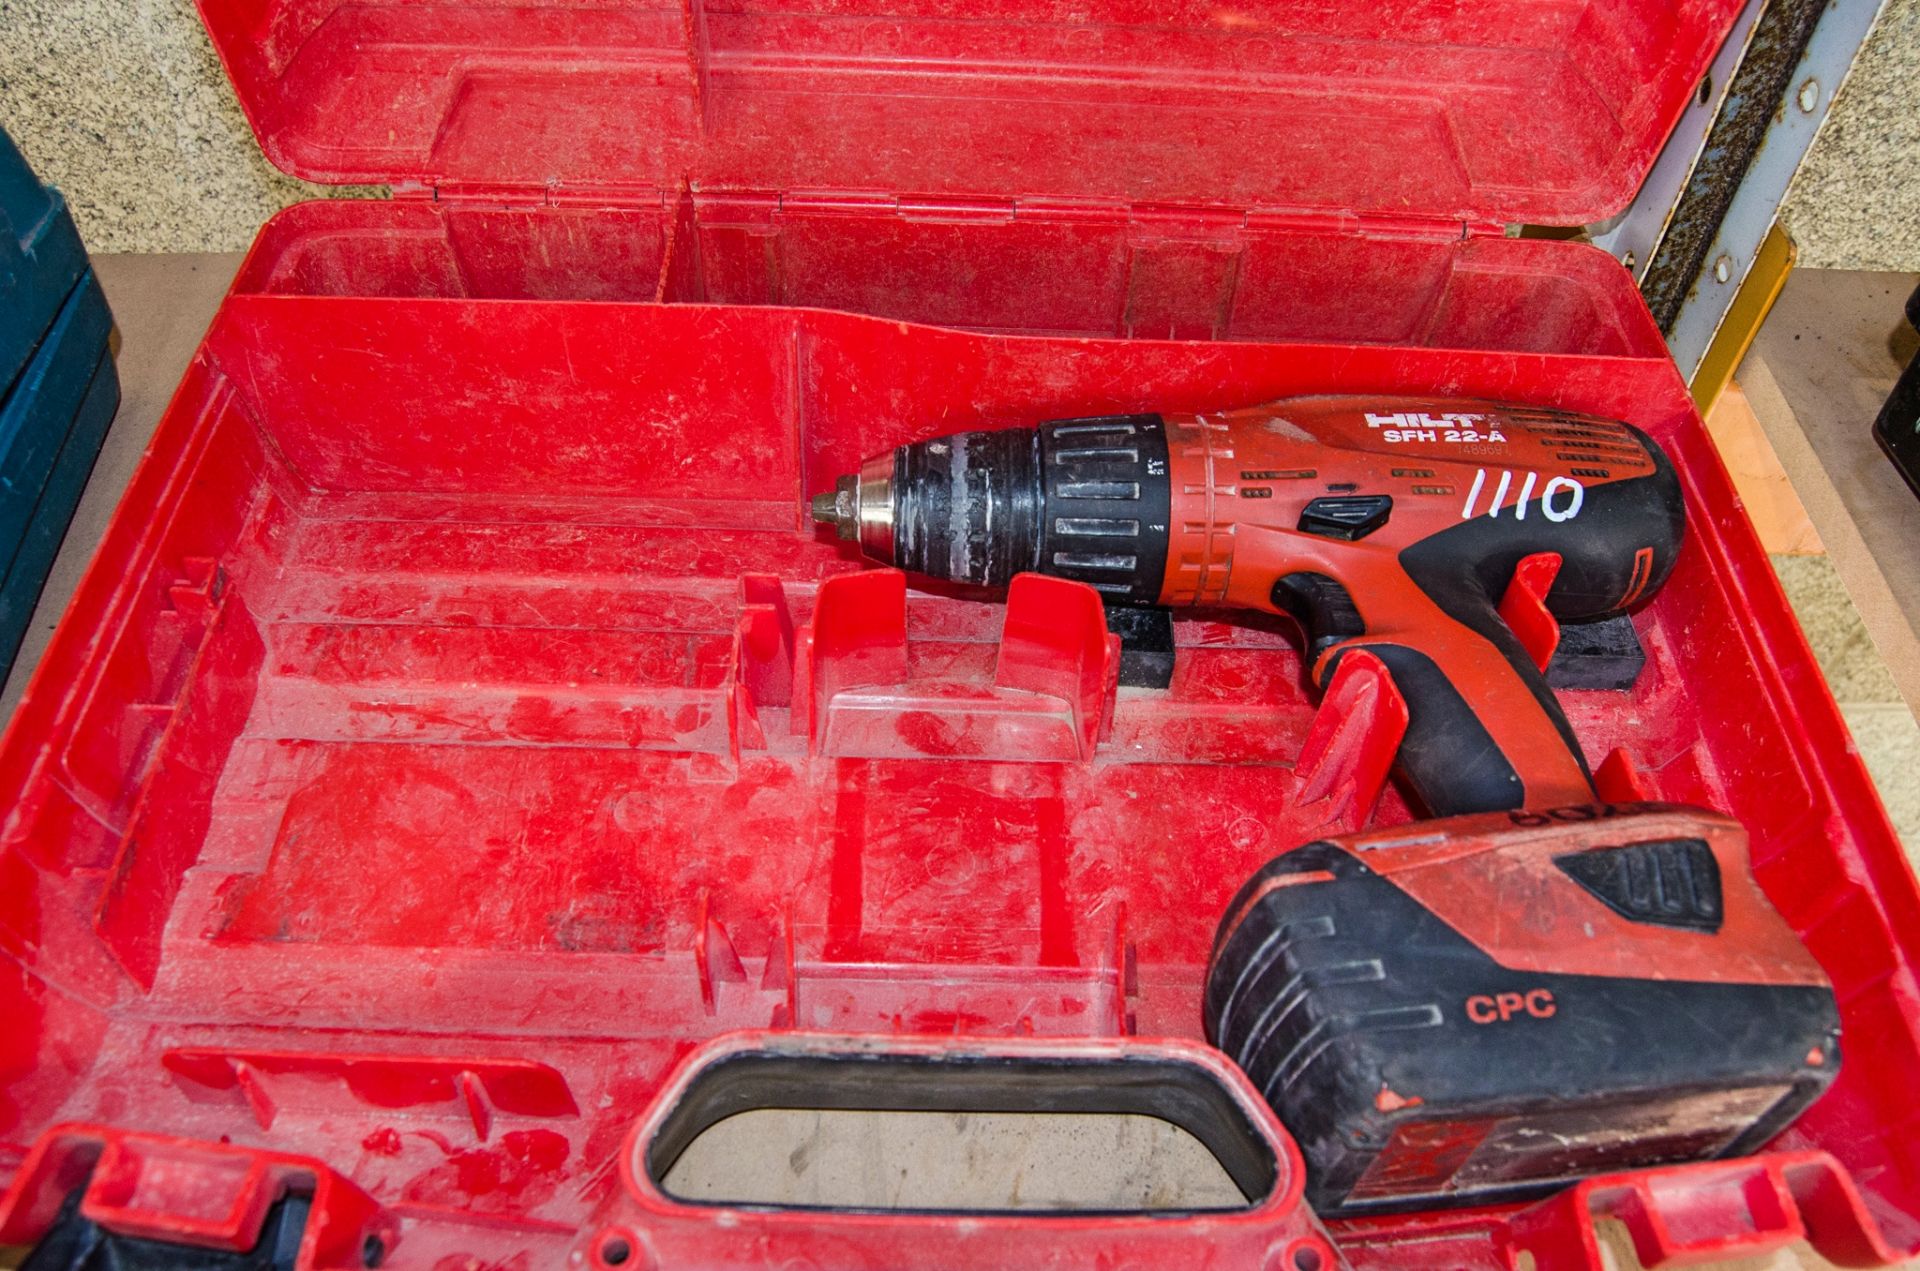 Hilti SFH 22-A 22v cordless power drill c/w battery and carry case ** No charger ** AM3992